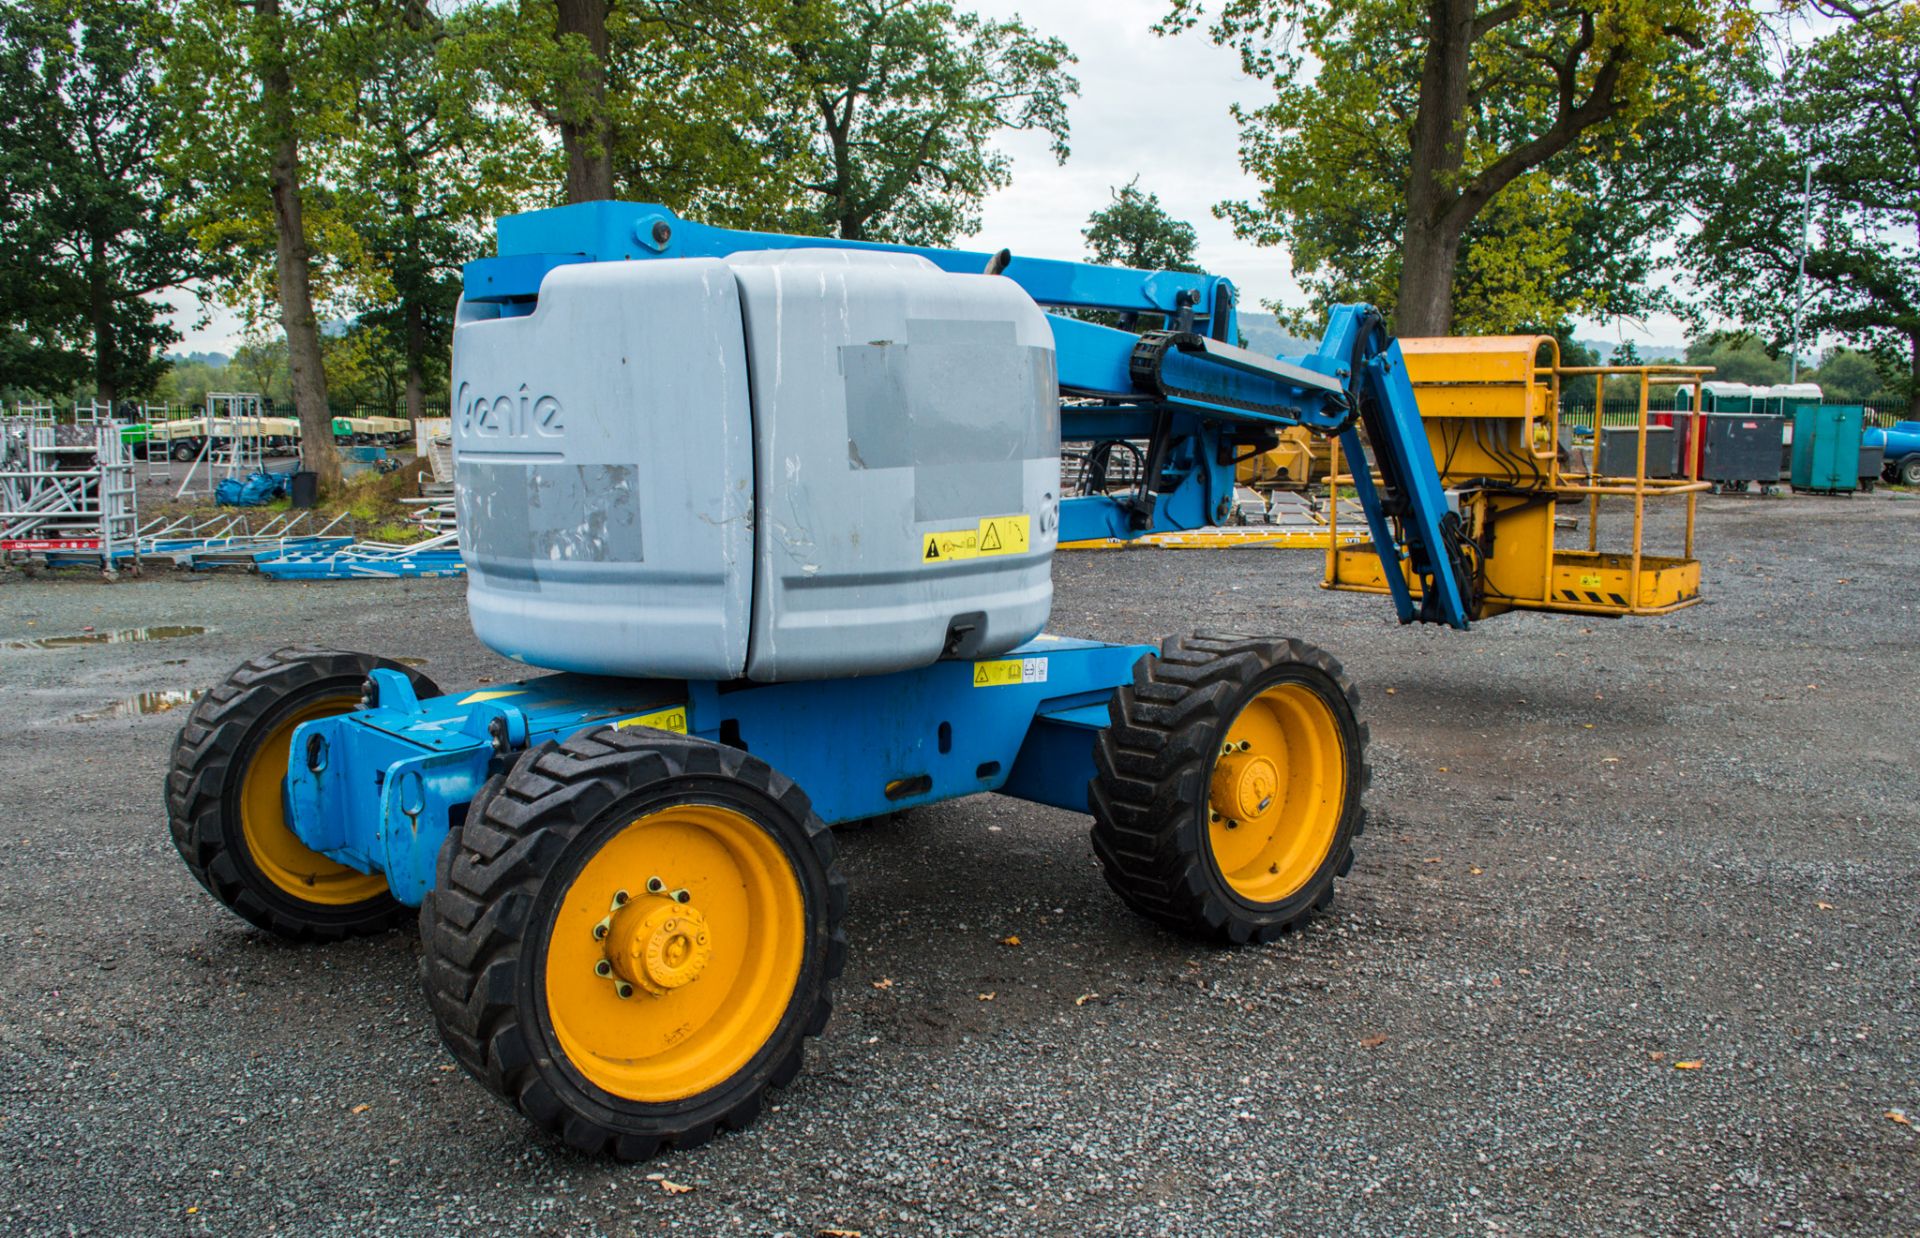 Genie Z-45/25 45 foot diesel driven 4WD articulated boom lift Year: 2011 S/N: 11B-1672 Recorded - Image 3 of 15